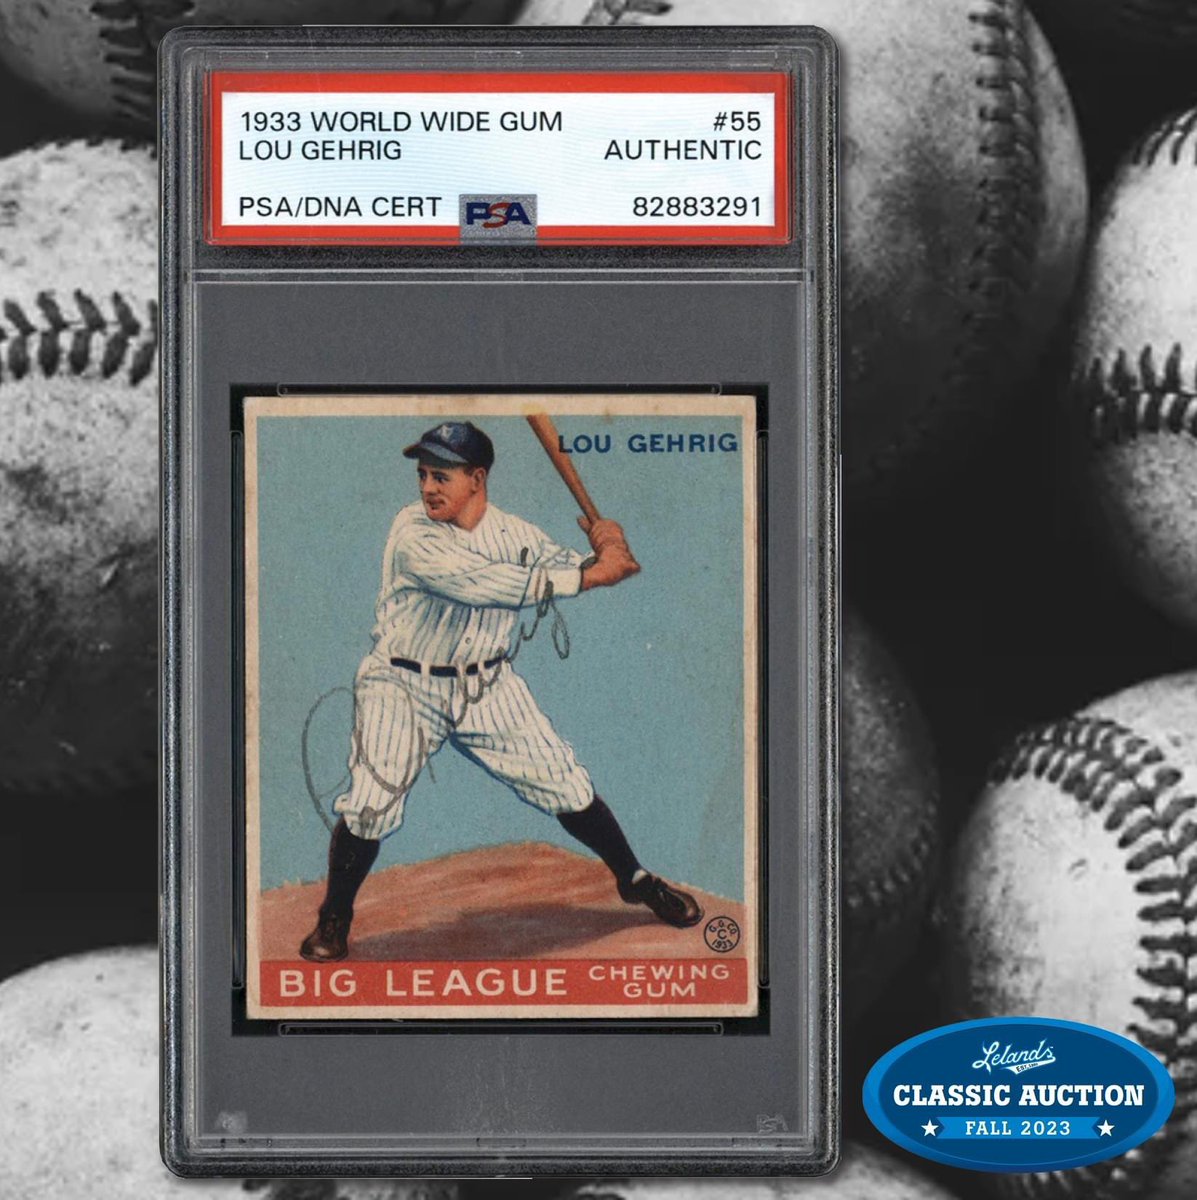 The only known 1933 World Wide Gum #55 Lou Gehrig Signed Card, authenticated by PSA/DNA as 'AA: Authentic Altered,' is up for grabs in the Lelands Fall Classic Auction. This iconic card features Gehrig's bold signature and comes with a JSA LOA. lelands.com